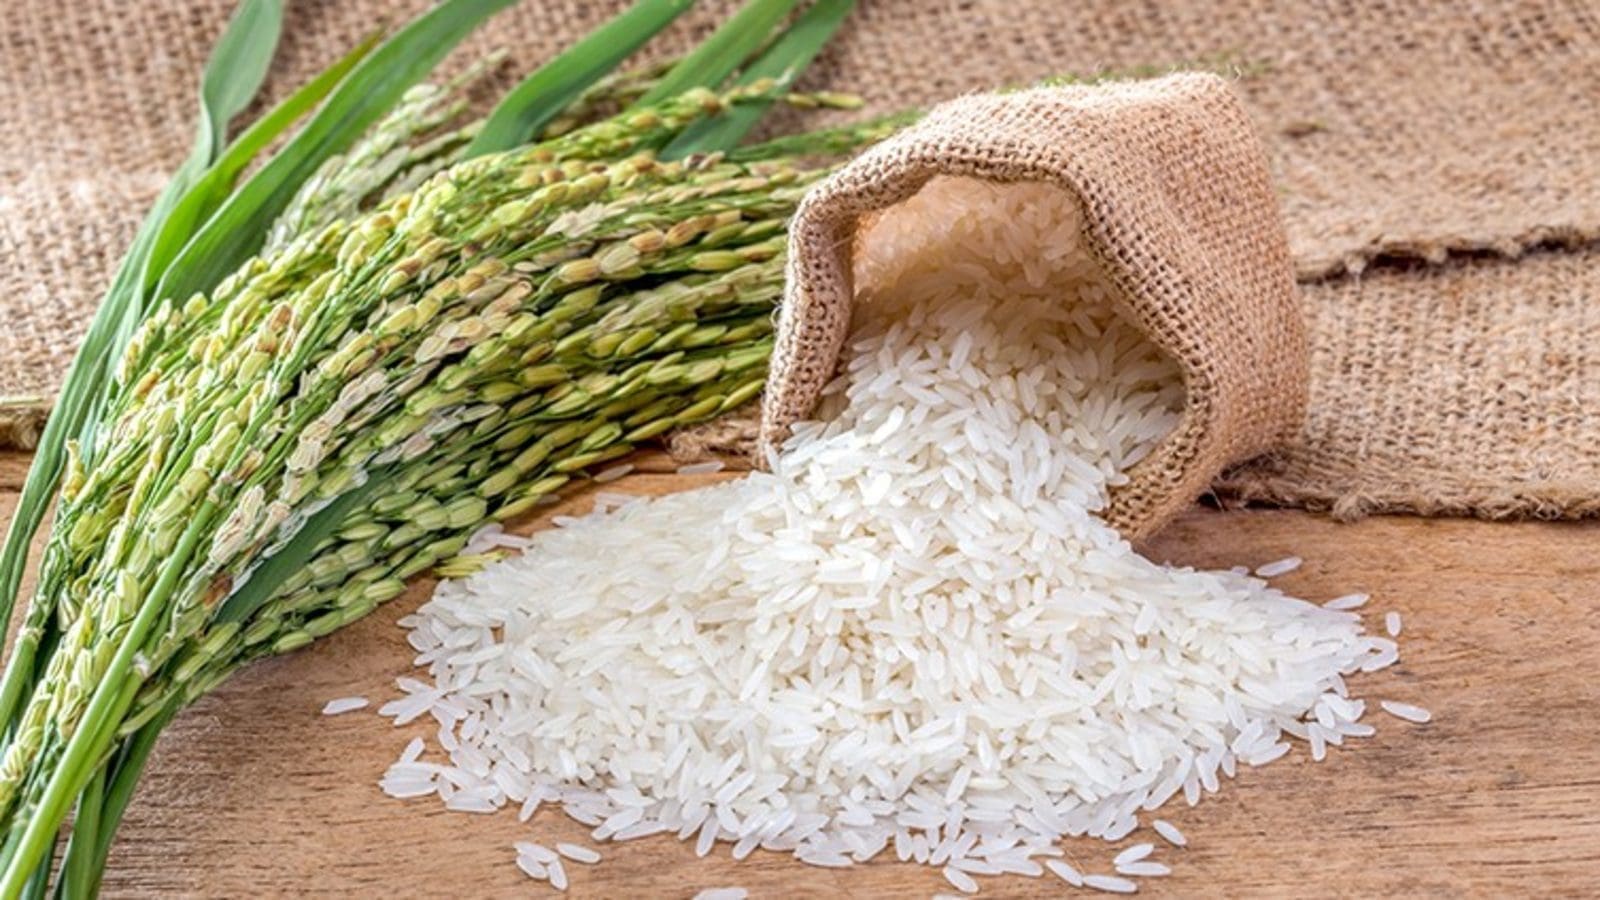 India bans non-basmati rice exports to regulate domestic prices